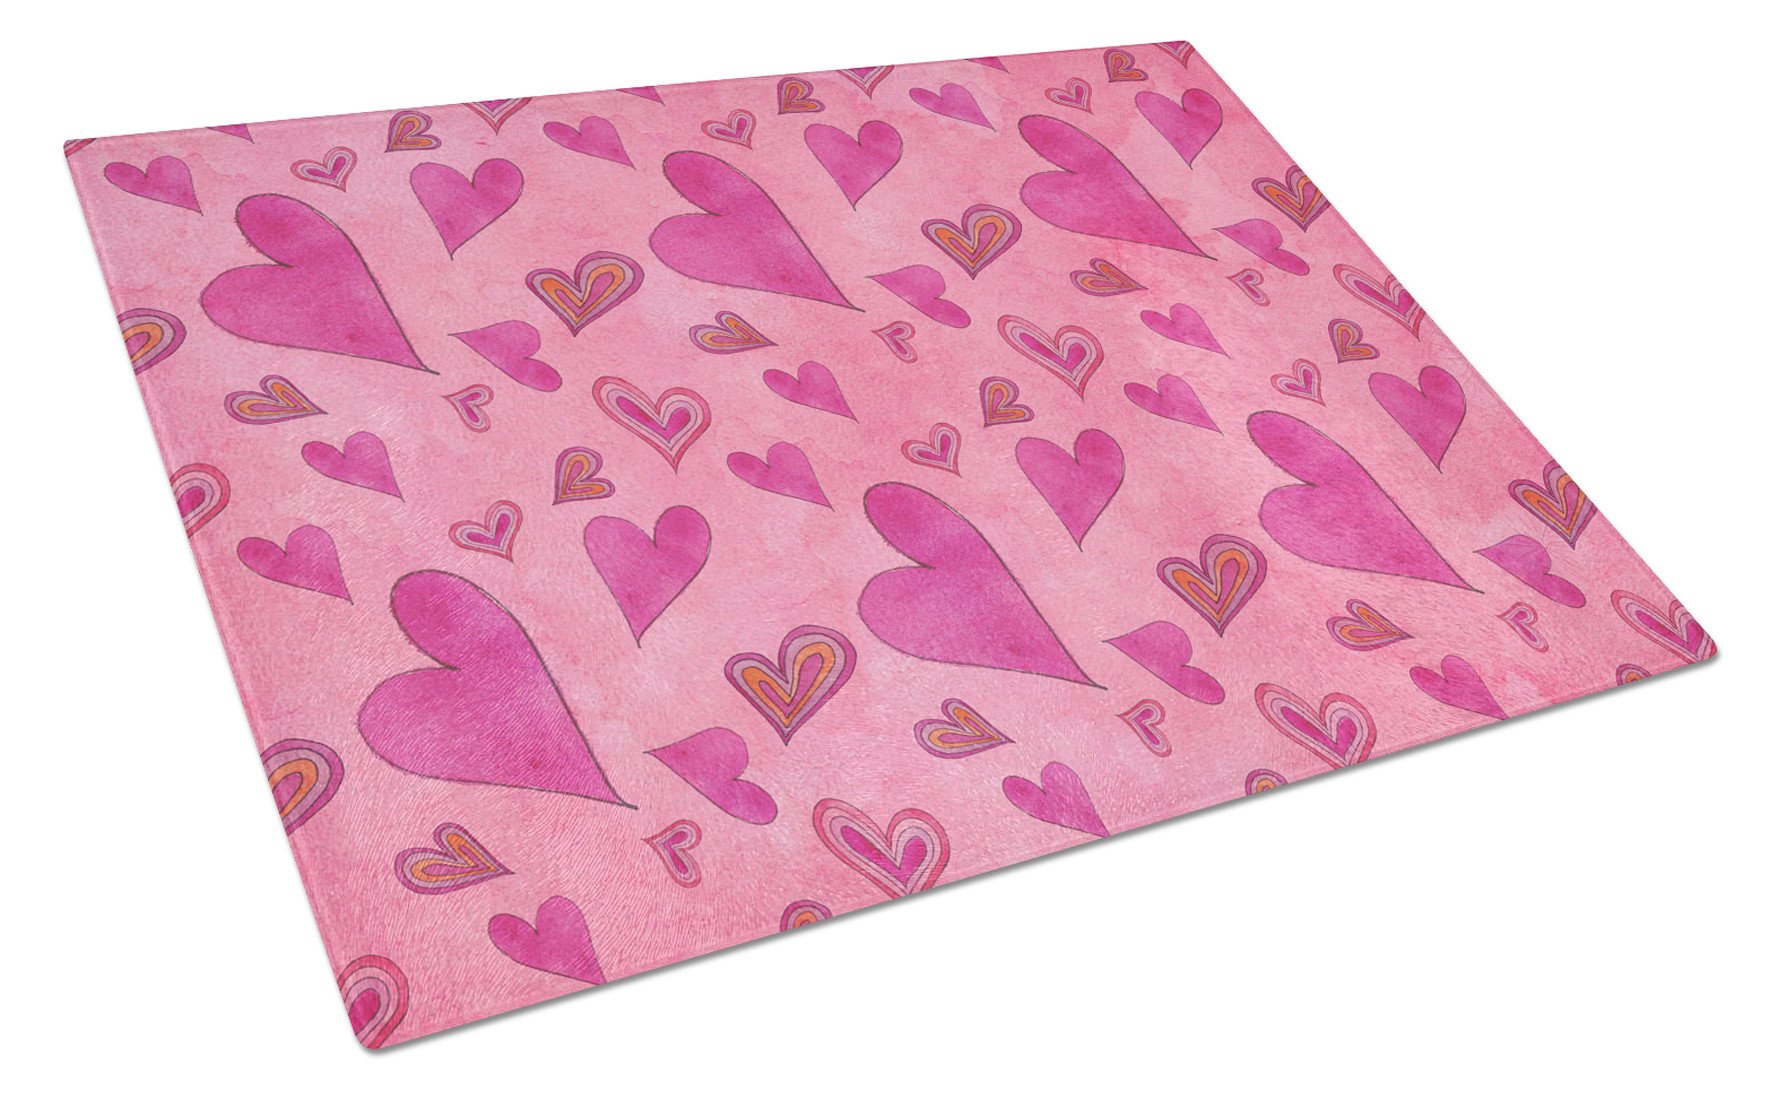 Watercolor Love and Hearts Glass Cutting Board Large BB7550LCB by Caroline's Treasures